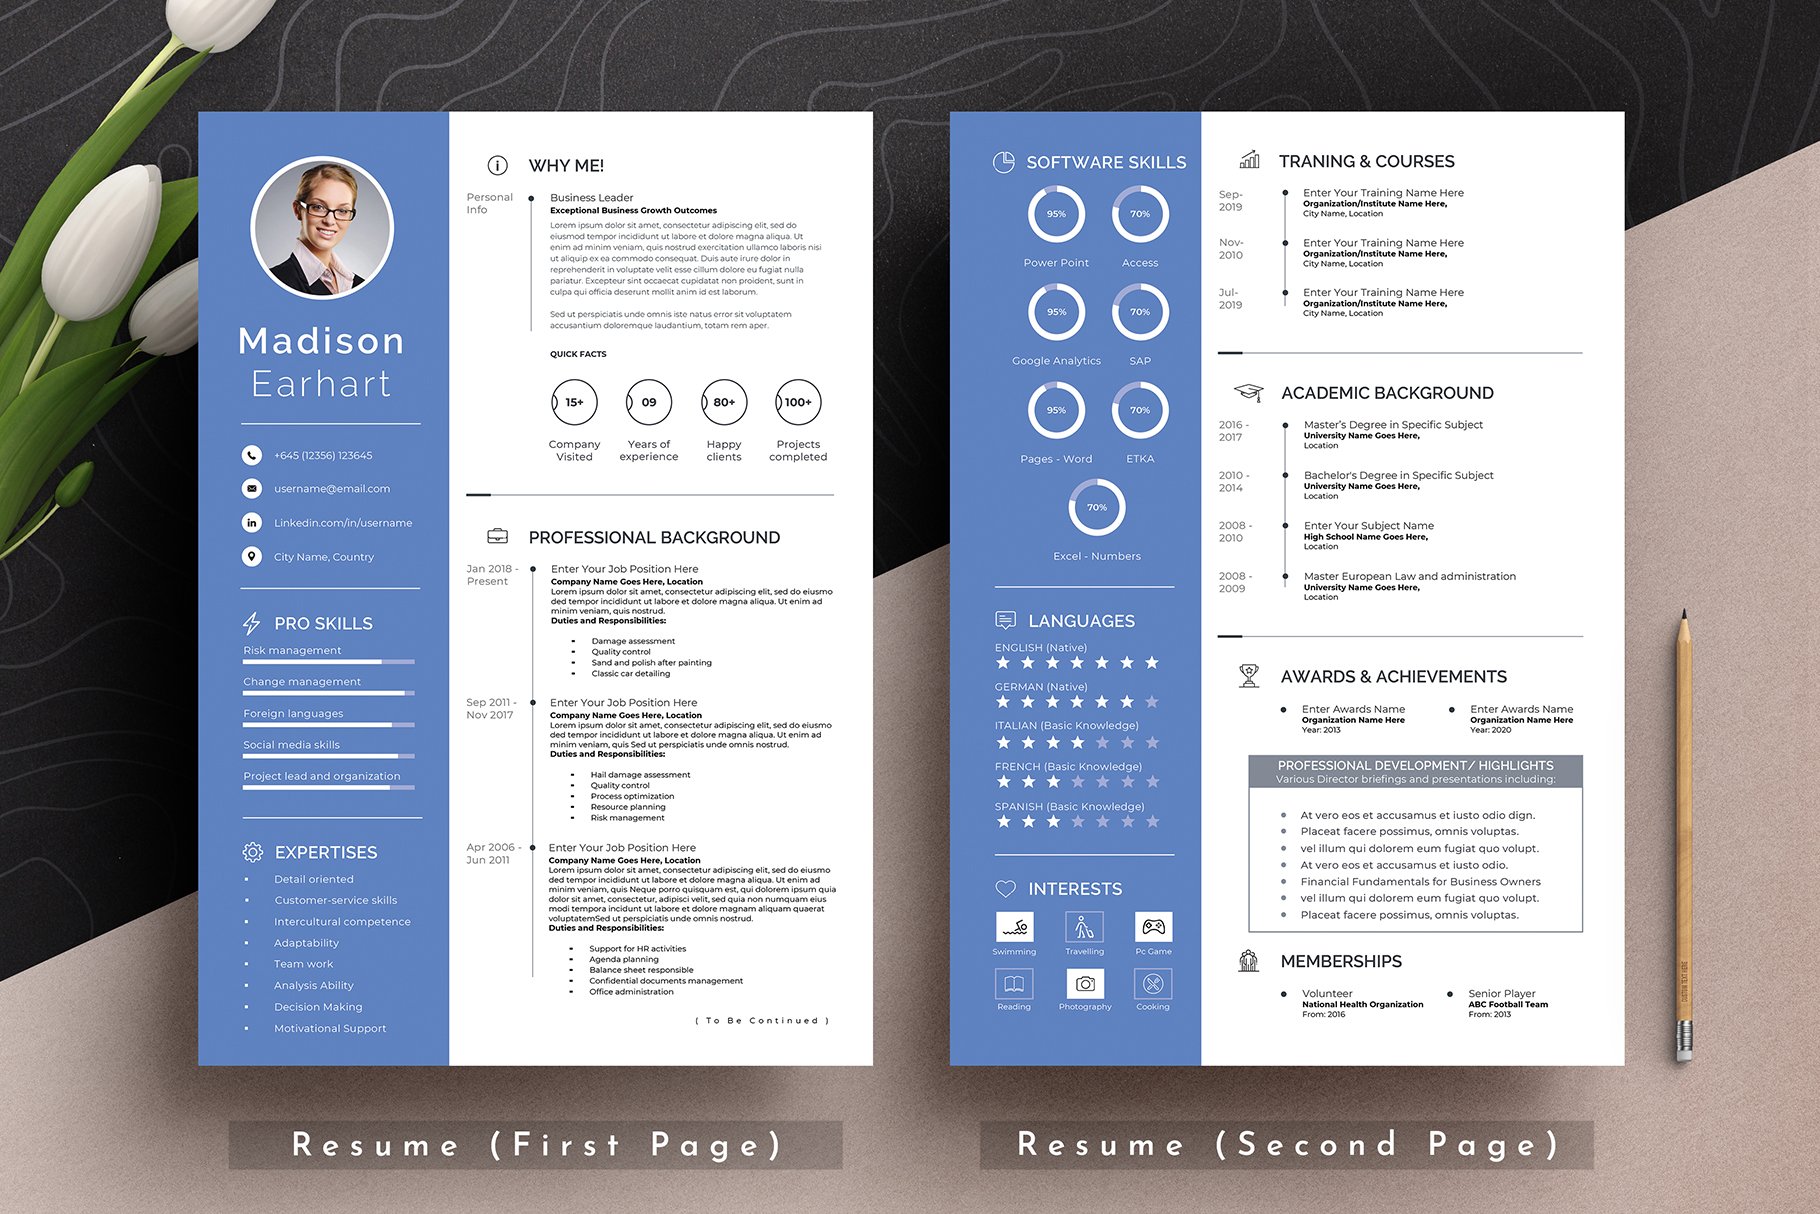 Restaurant Manager's Shift Card Template in Word, Apple Pages